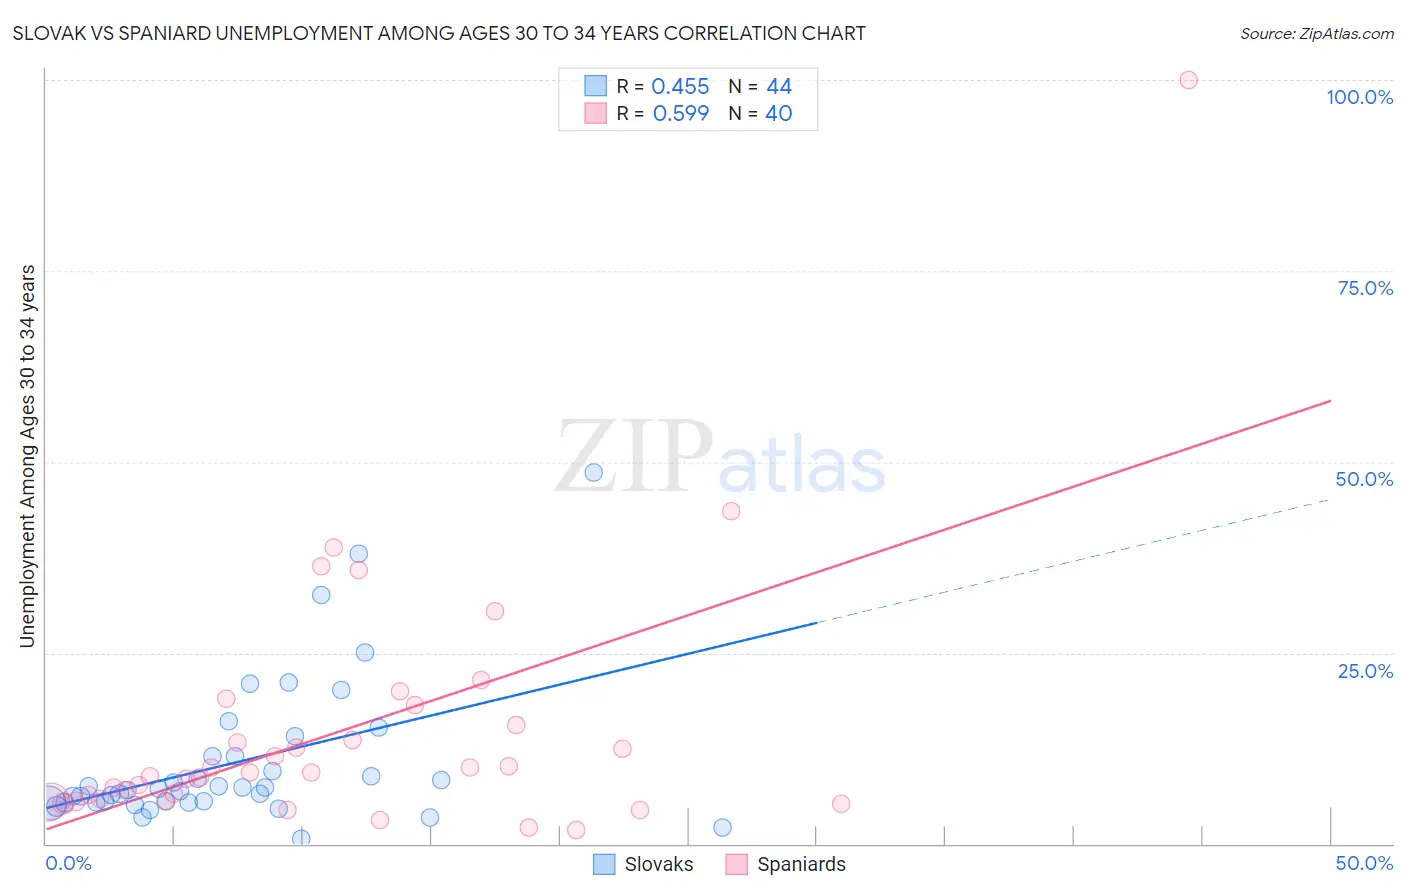 Slovak vs Spaniard Unemployment Among Ages 30 to 34 years